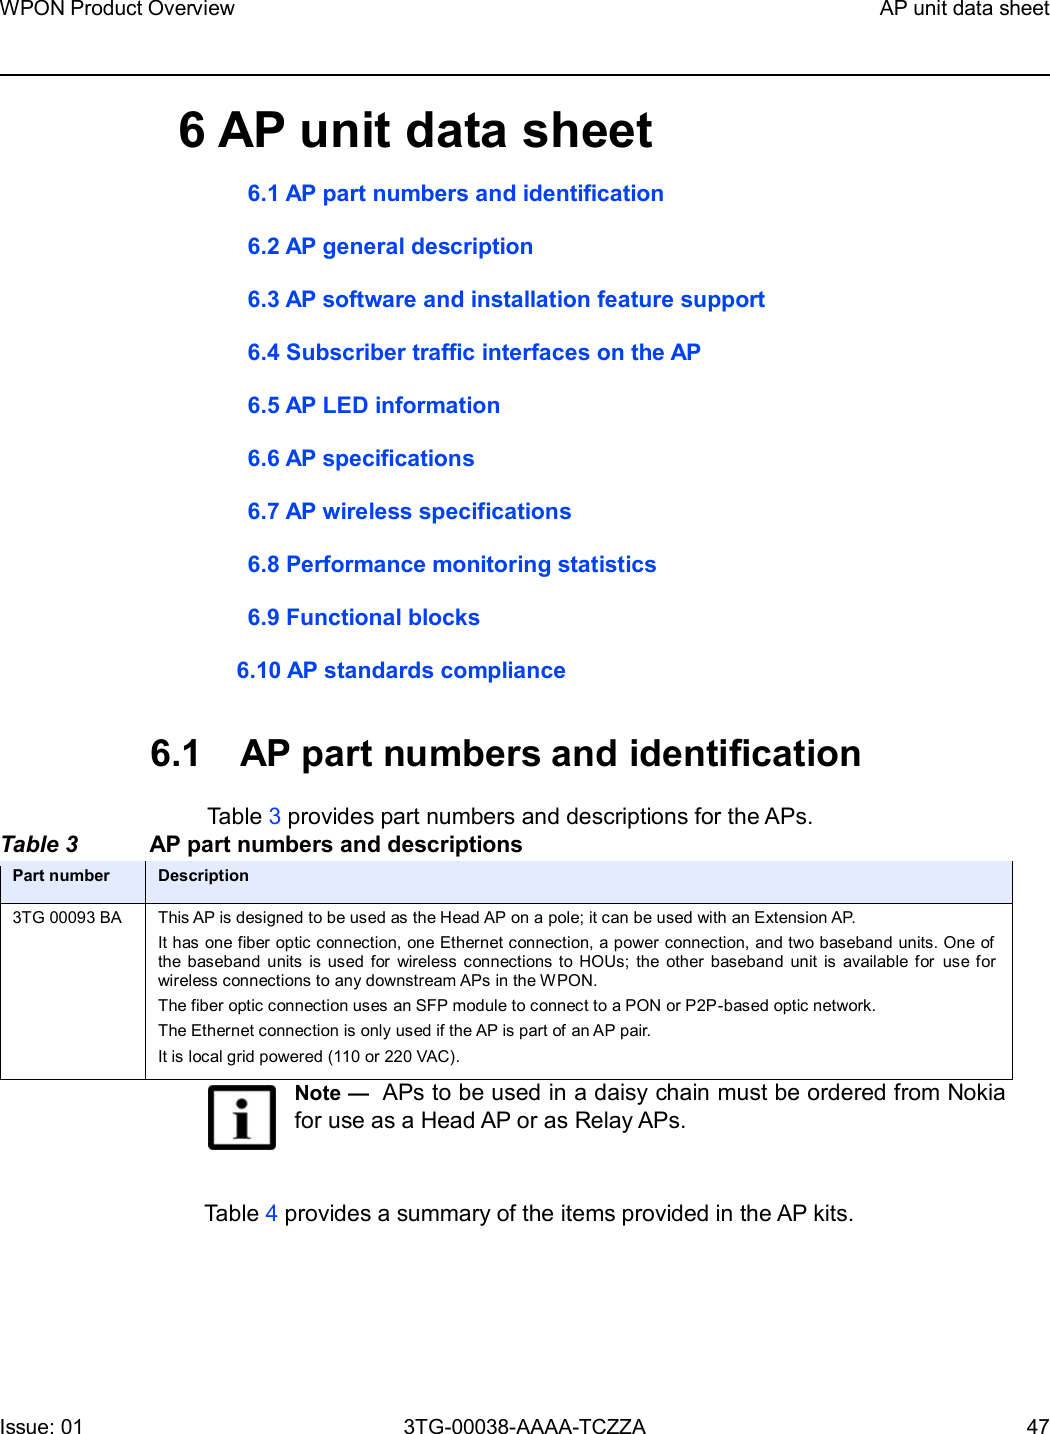 Page 47 of Nokia Bell 7577WPONAPAC WPON User Manual WPON Product Overview